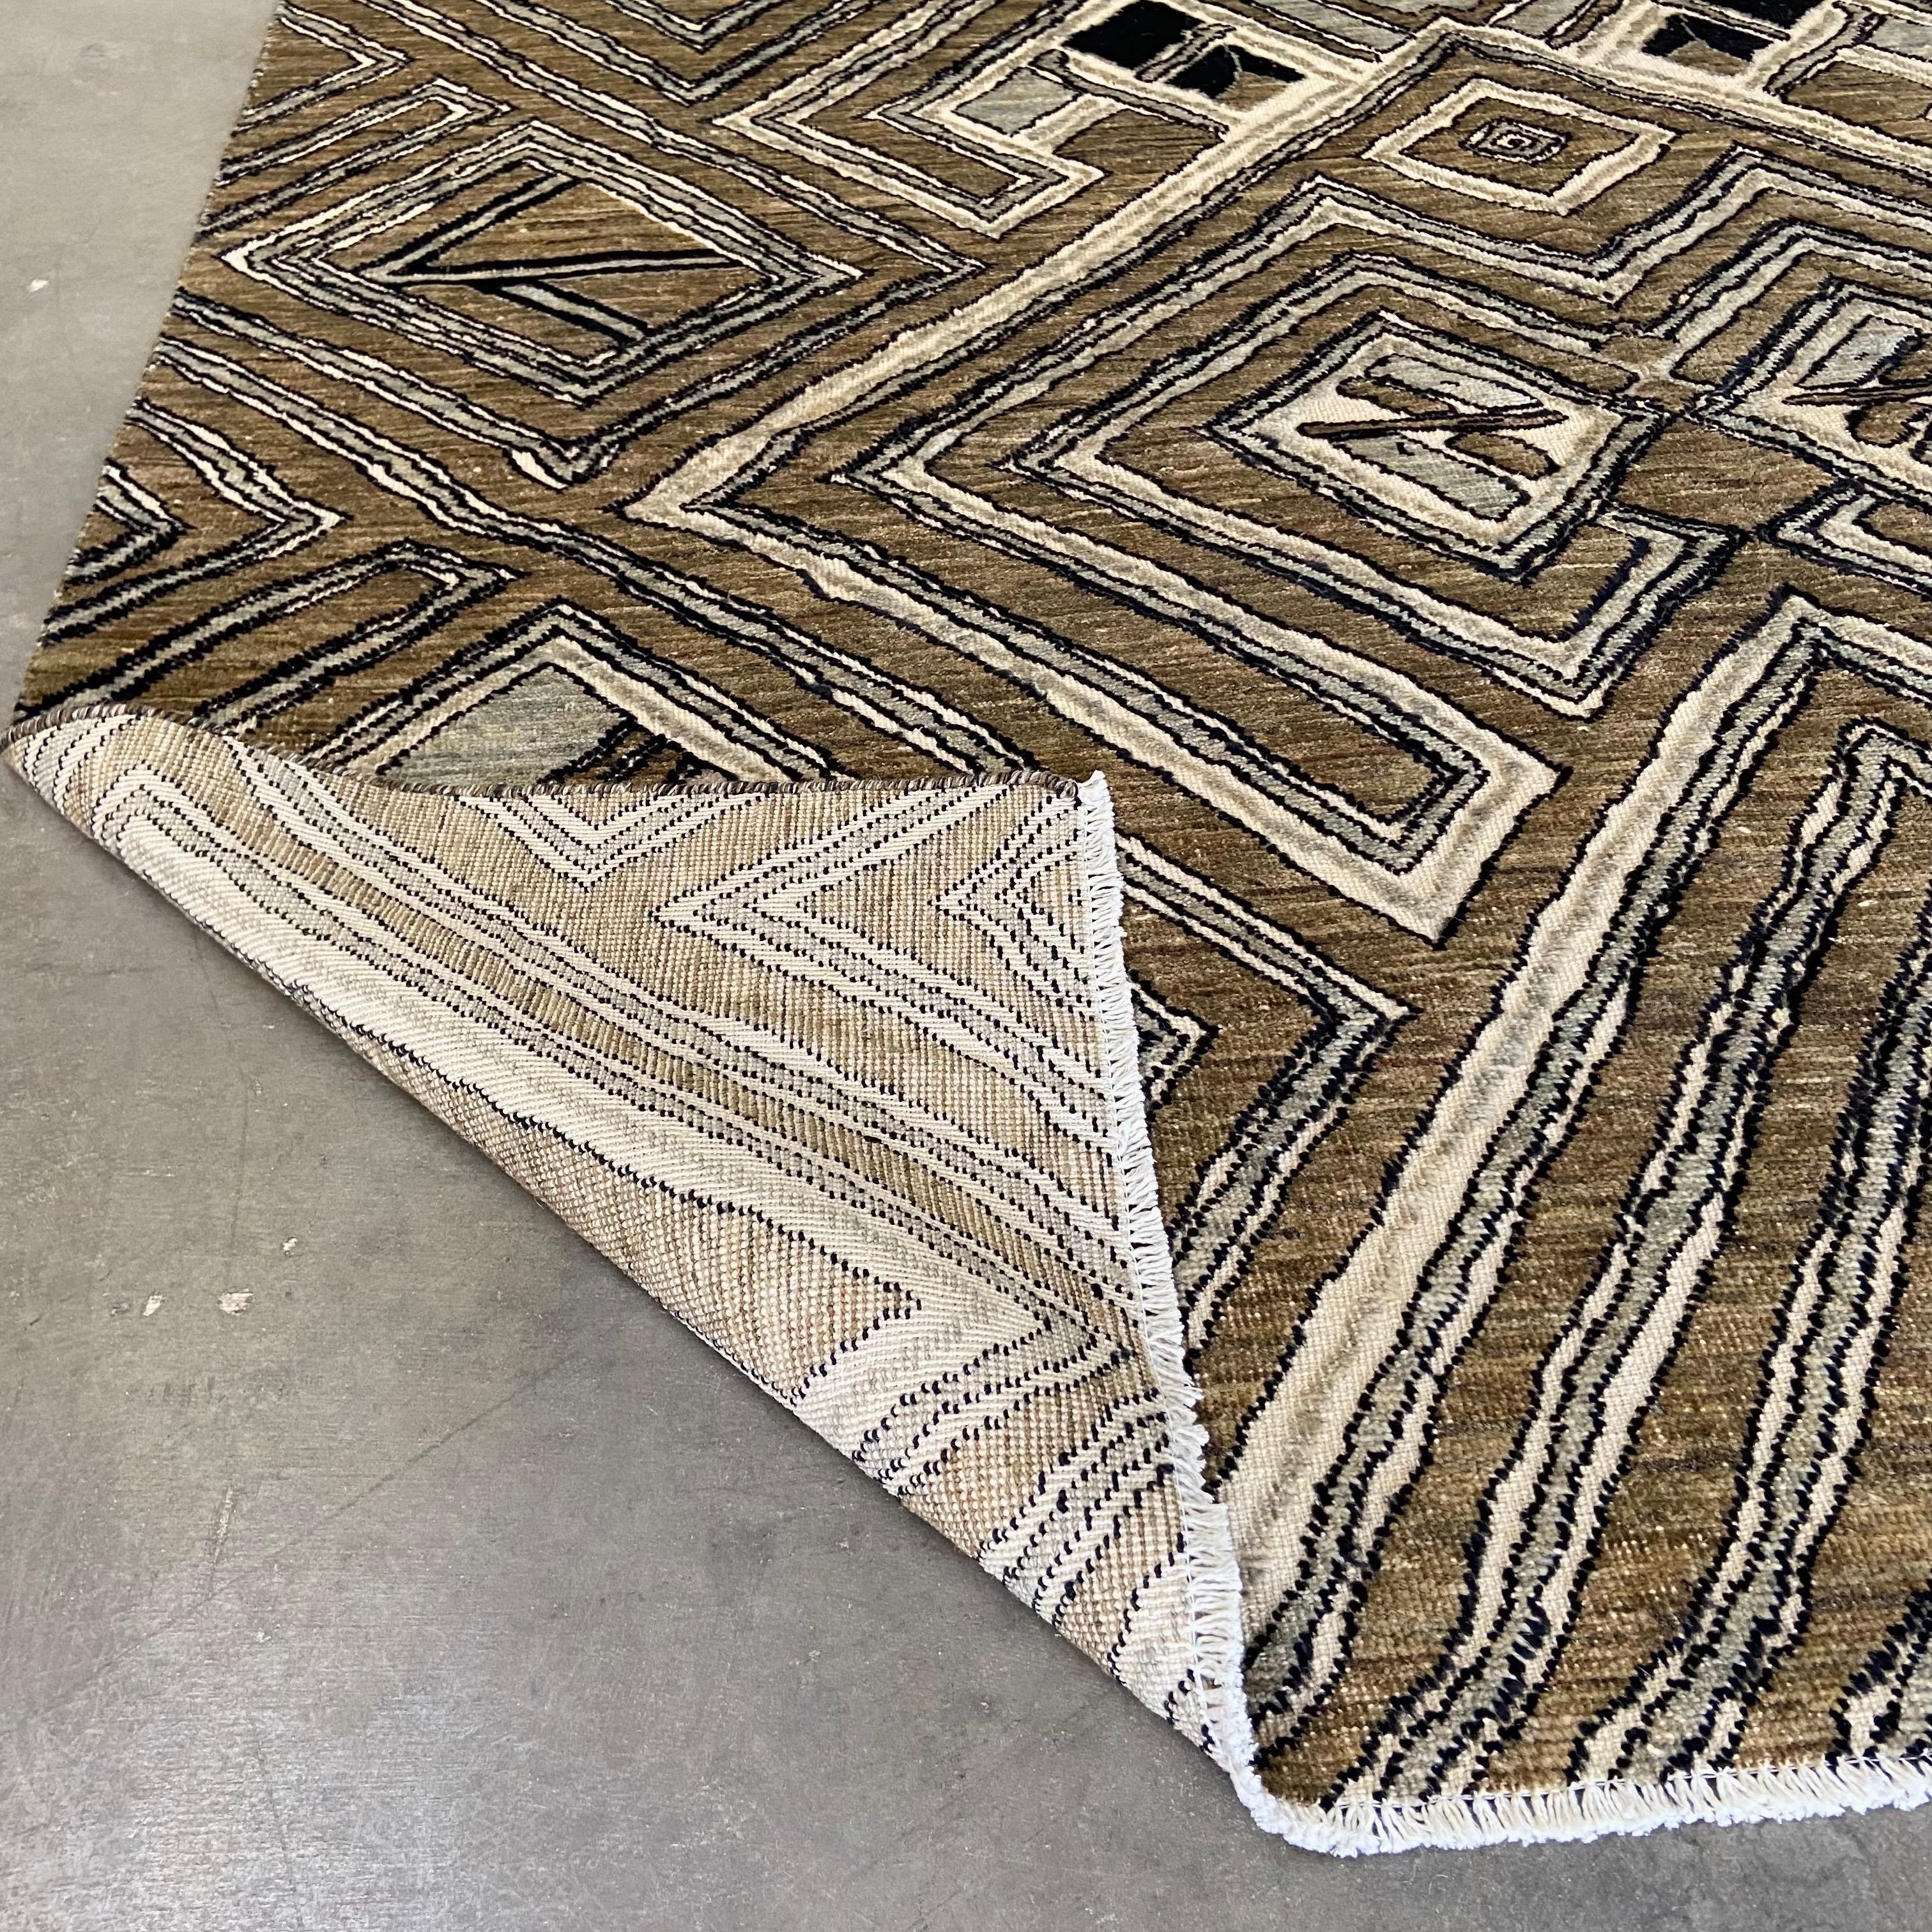 Custom Made Turkish Wool Rug in Brown Black and Gray In New Condition For Sale In Brea, CA